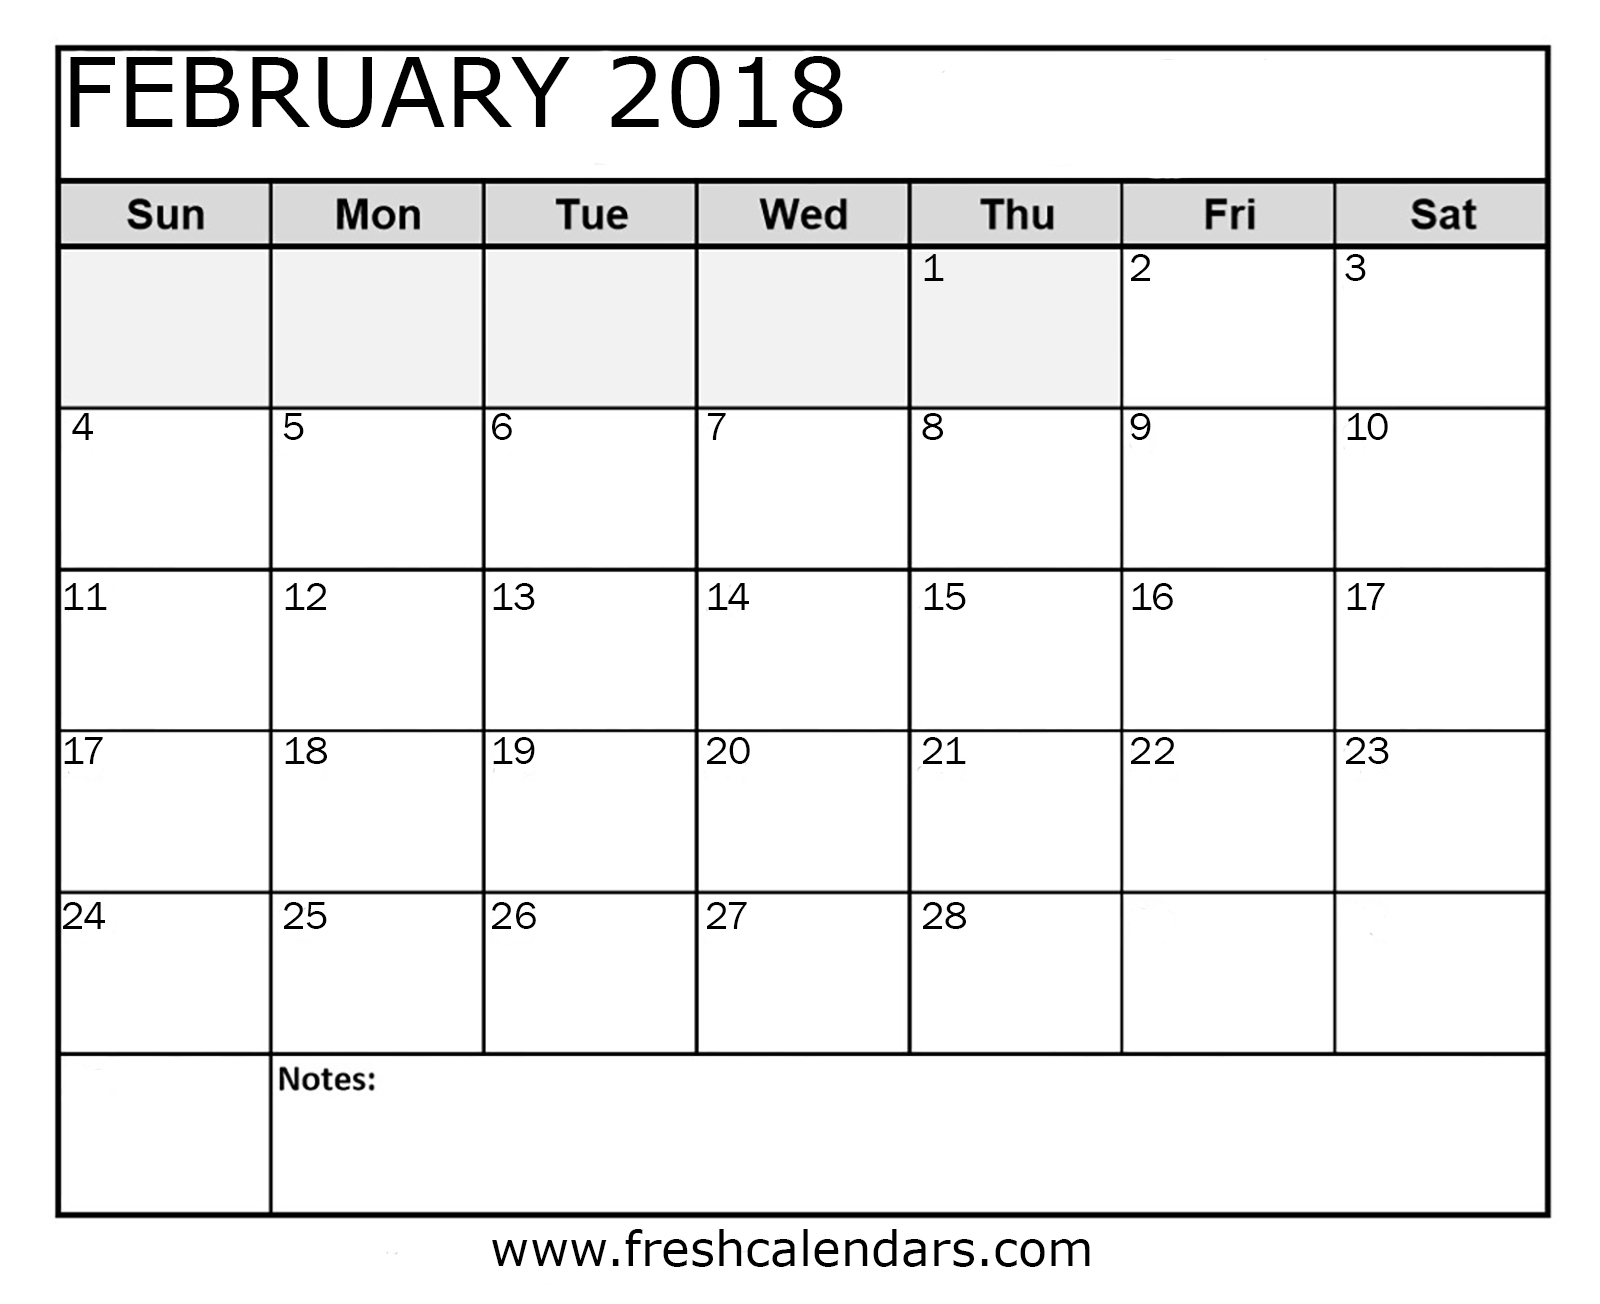 February 2018 Calendar Printable Word Pdf Format With Notes